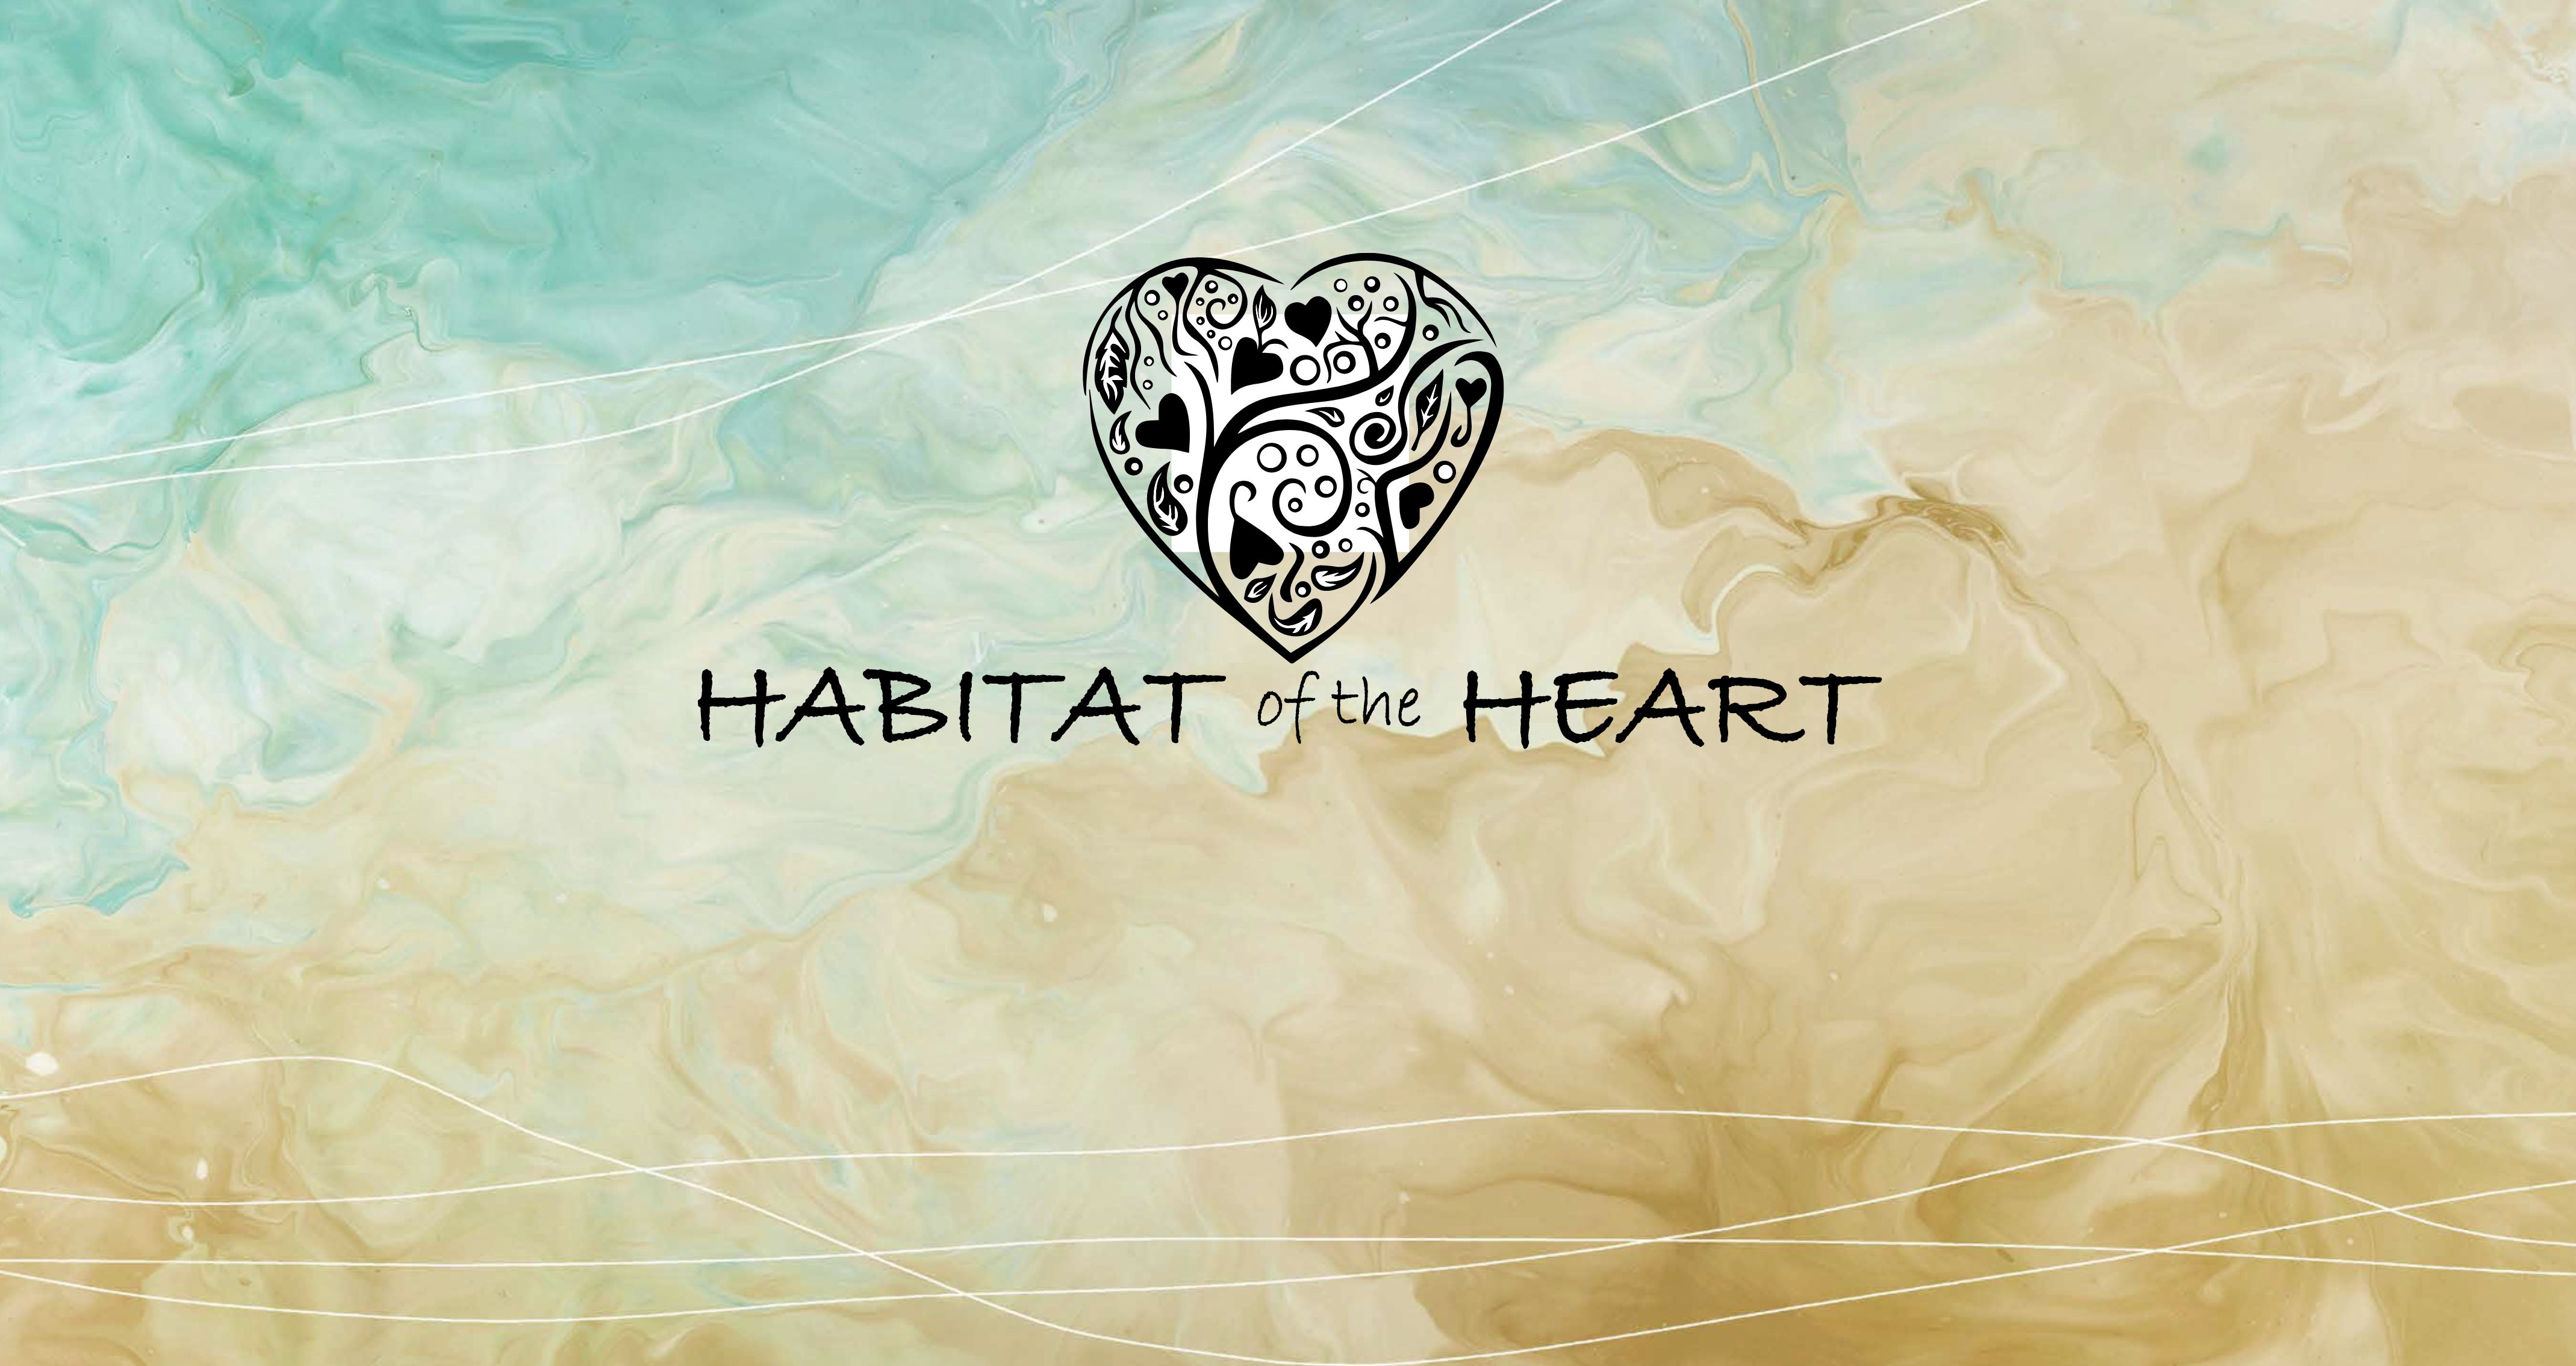 habitat of the heart whats on web banner